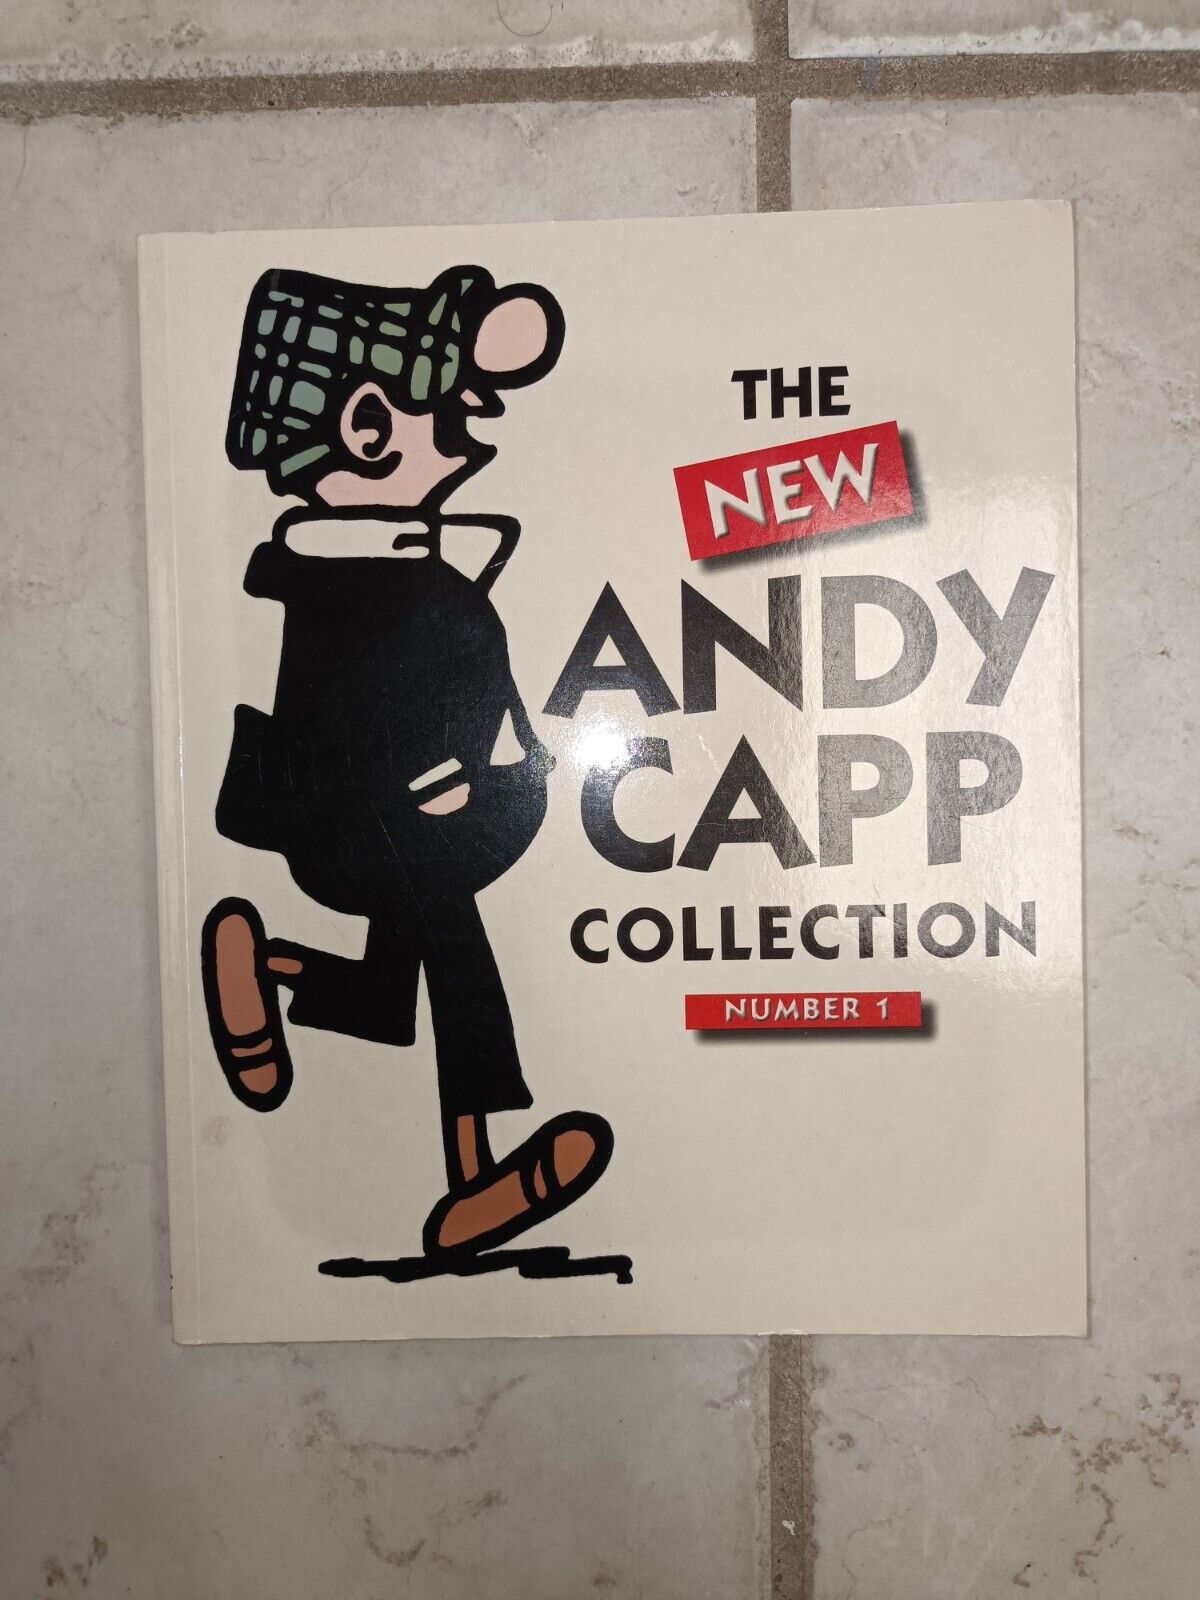 New Andy Capp Collection: Number 1